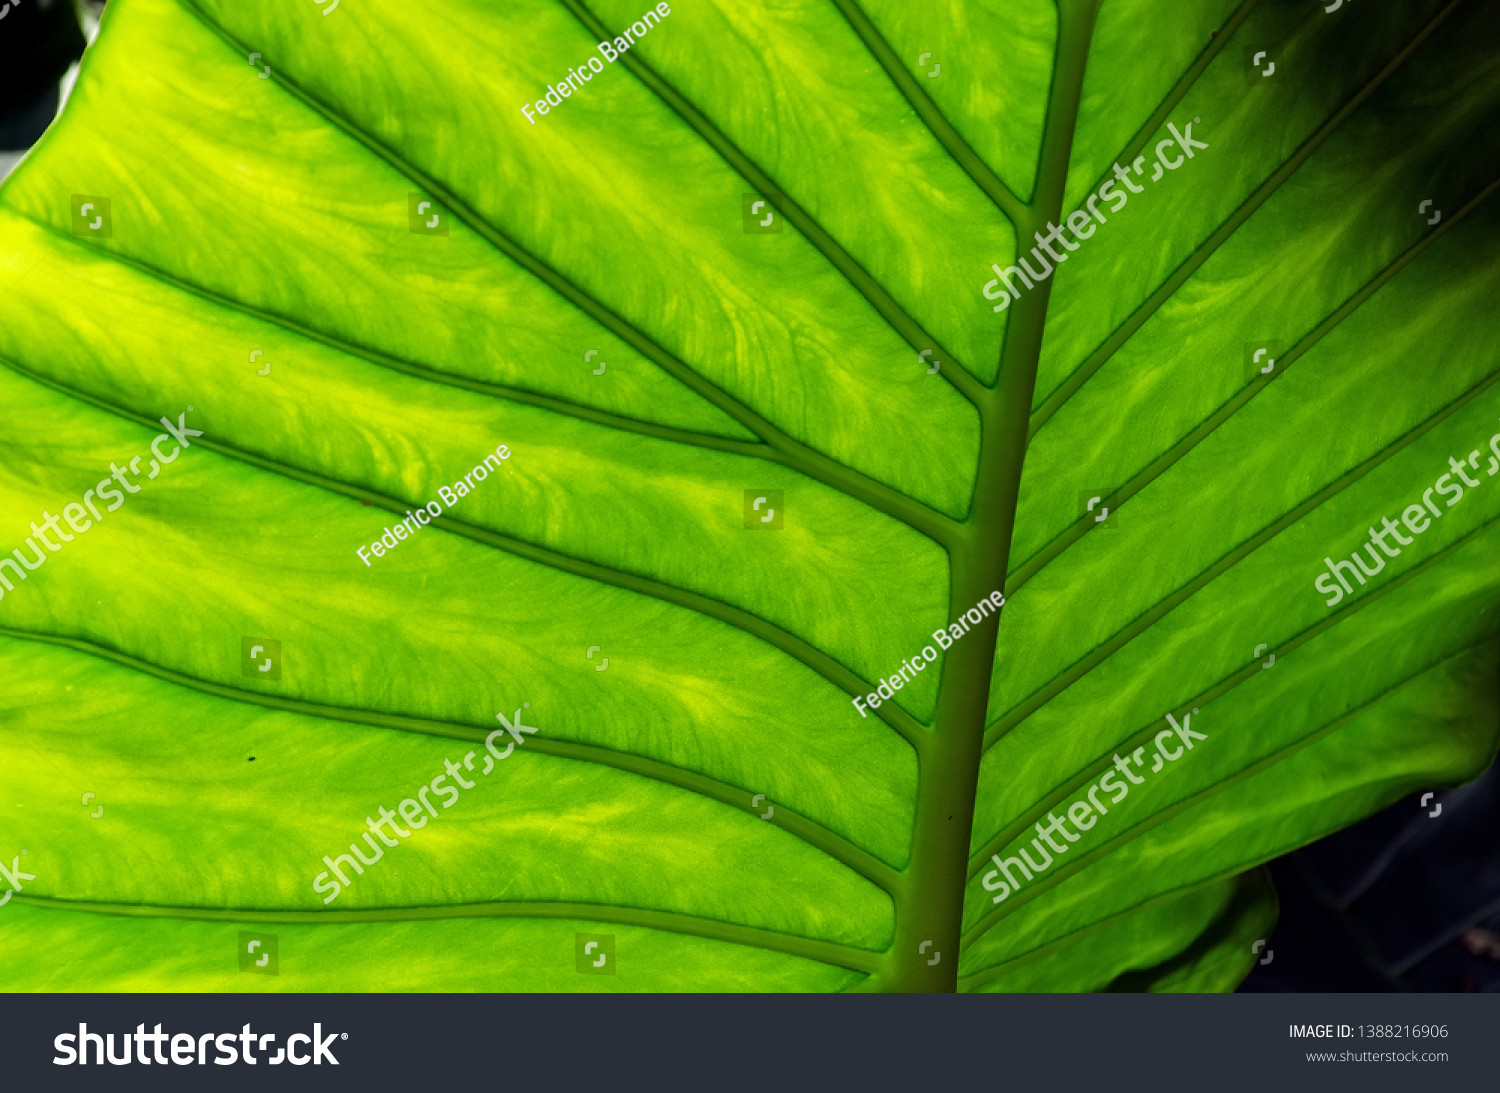 stock-photo-close-up-of-a-beautiful-and-